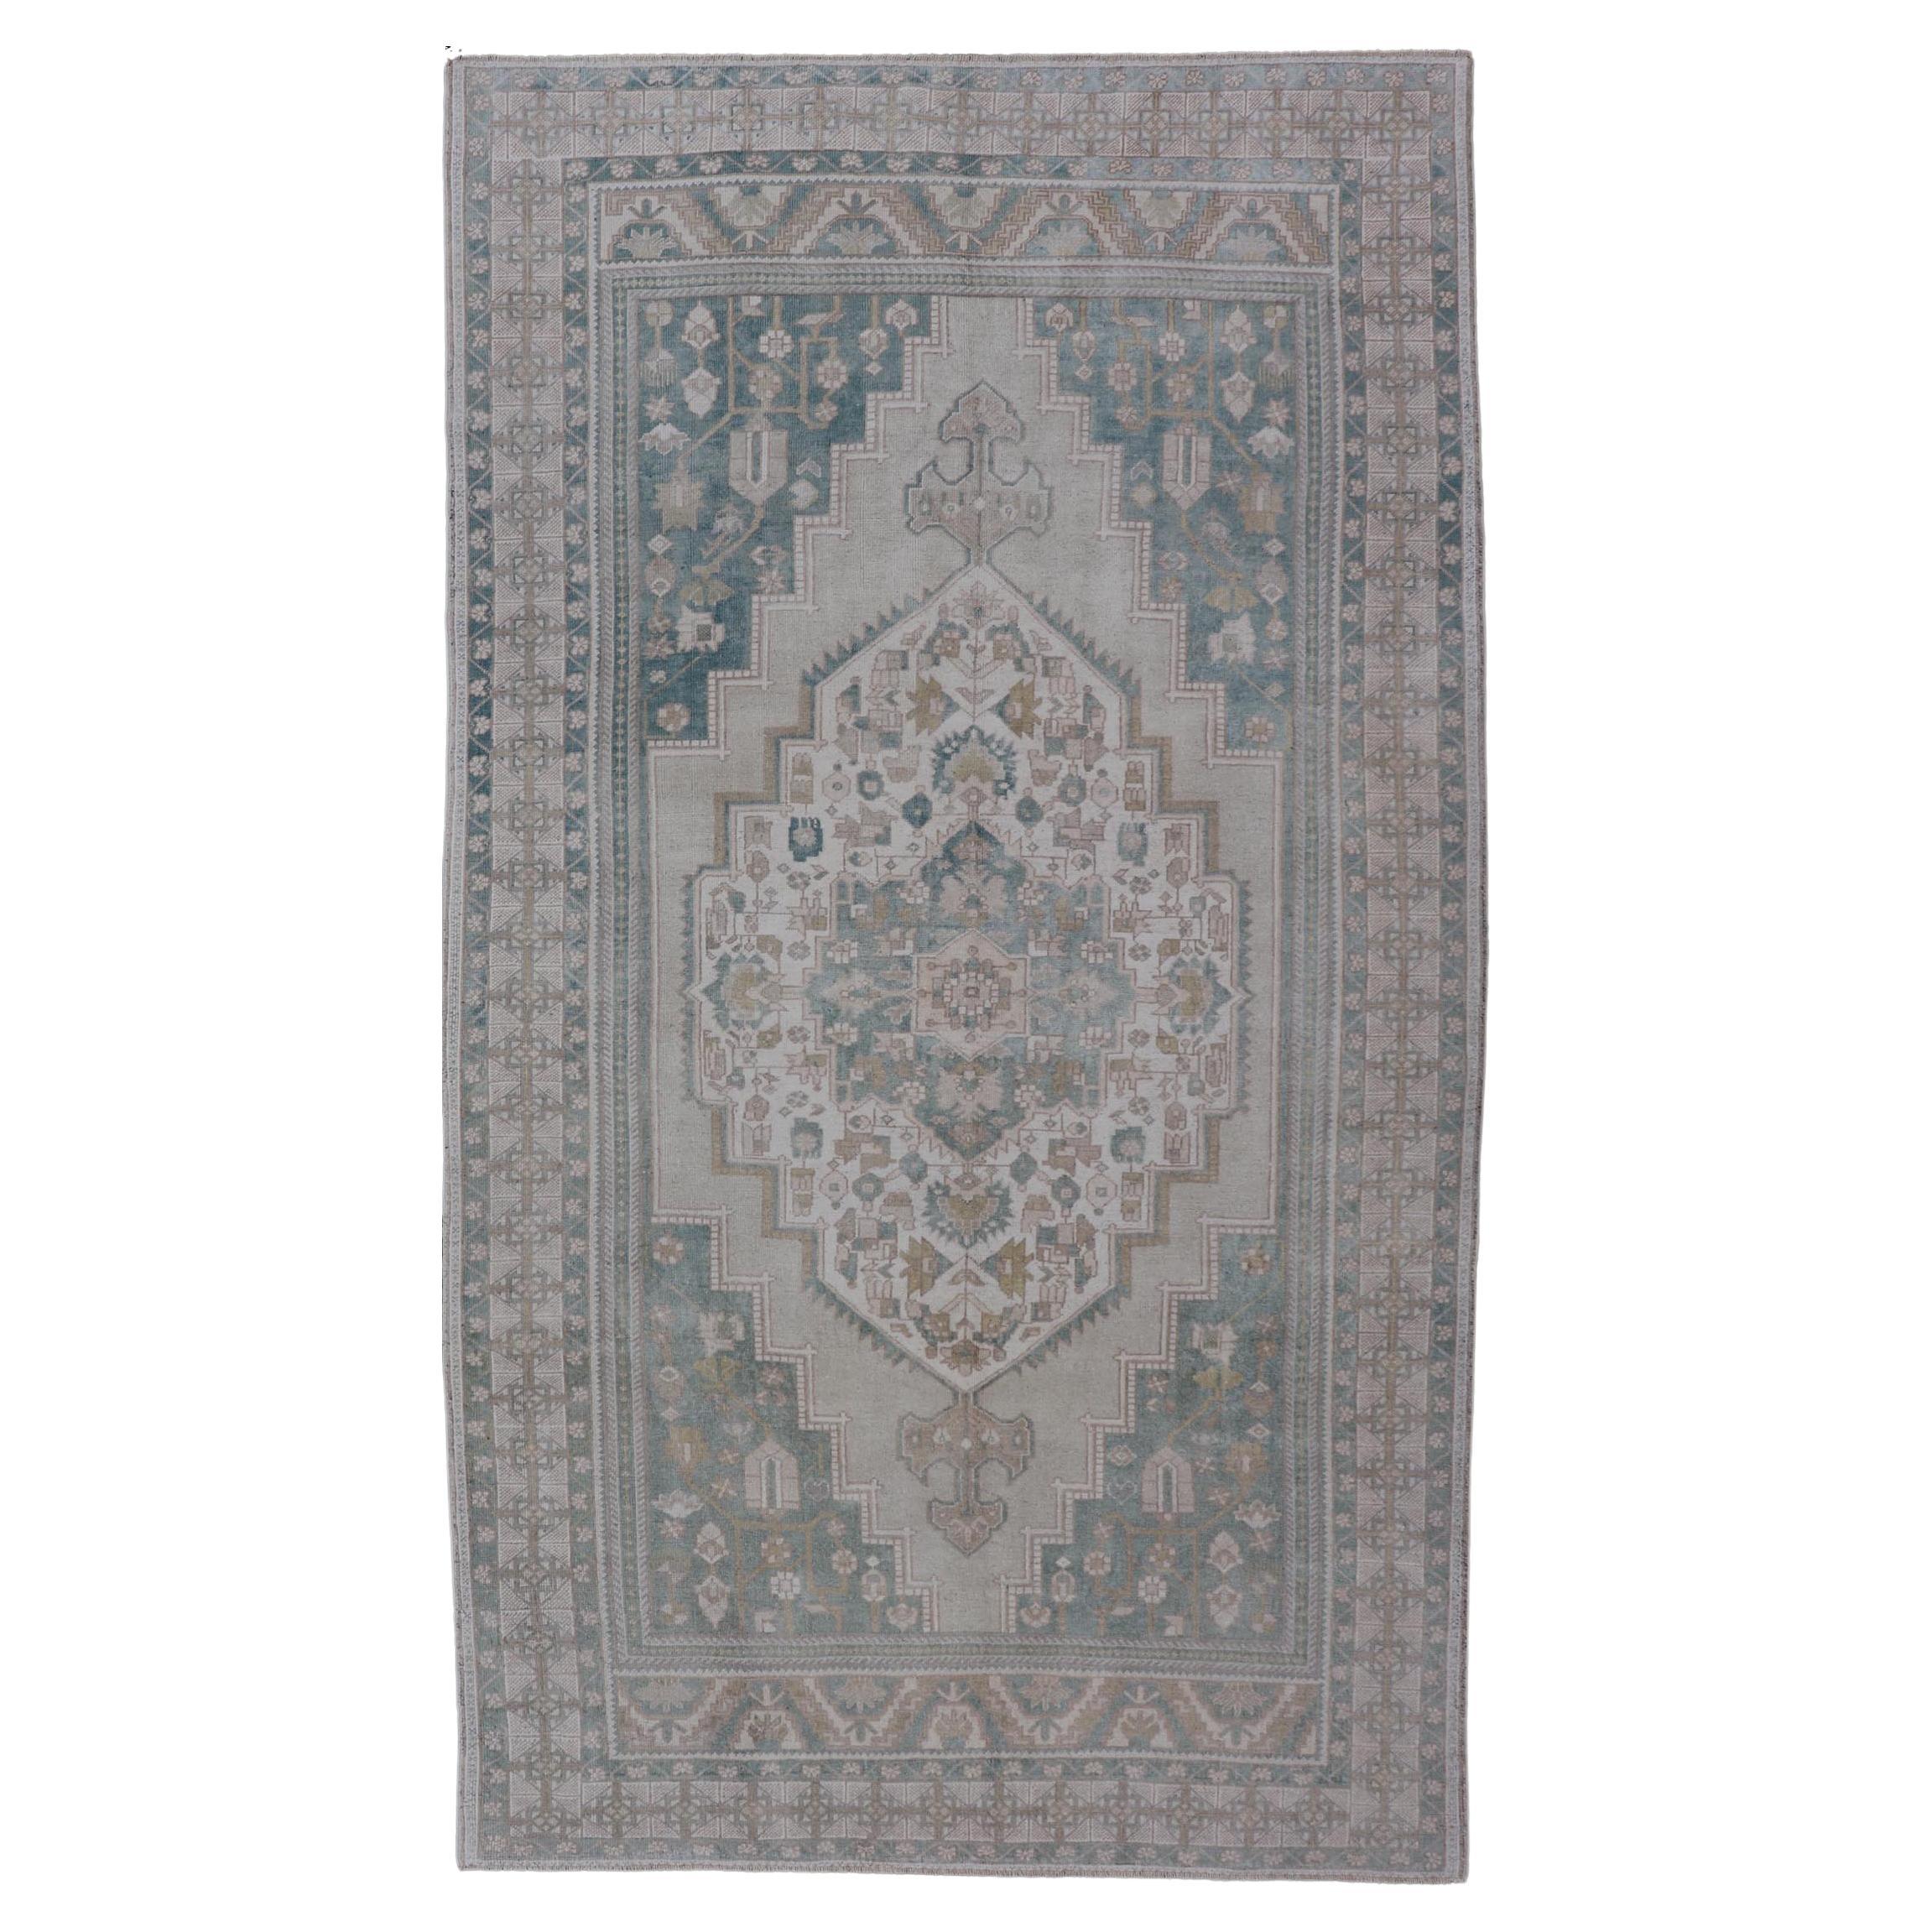 Turkish Vintage Oushak Rug With Medallion in Muted Light Green and Cream